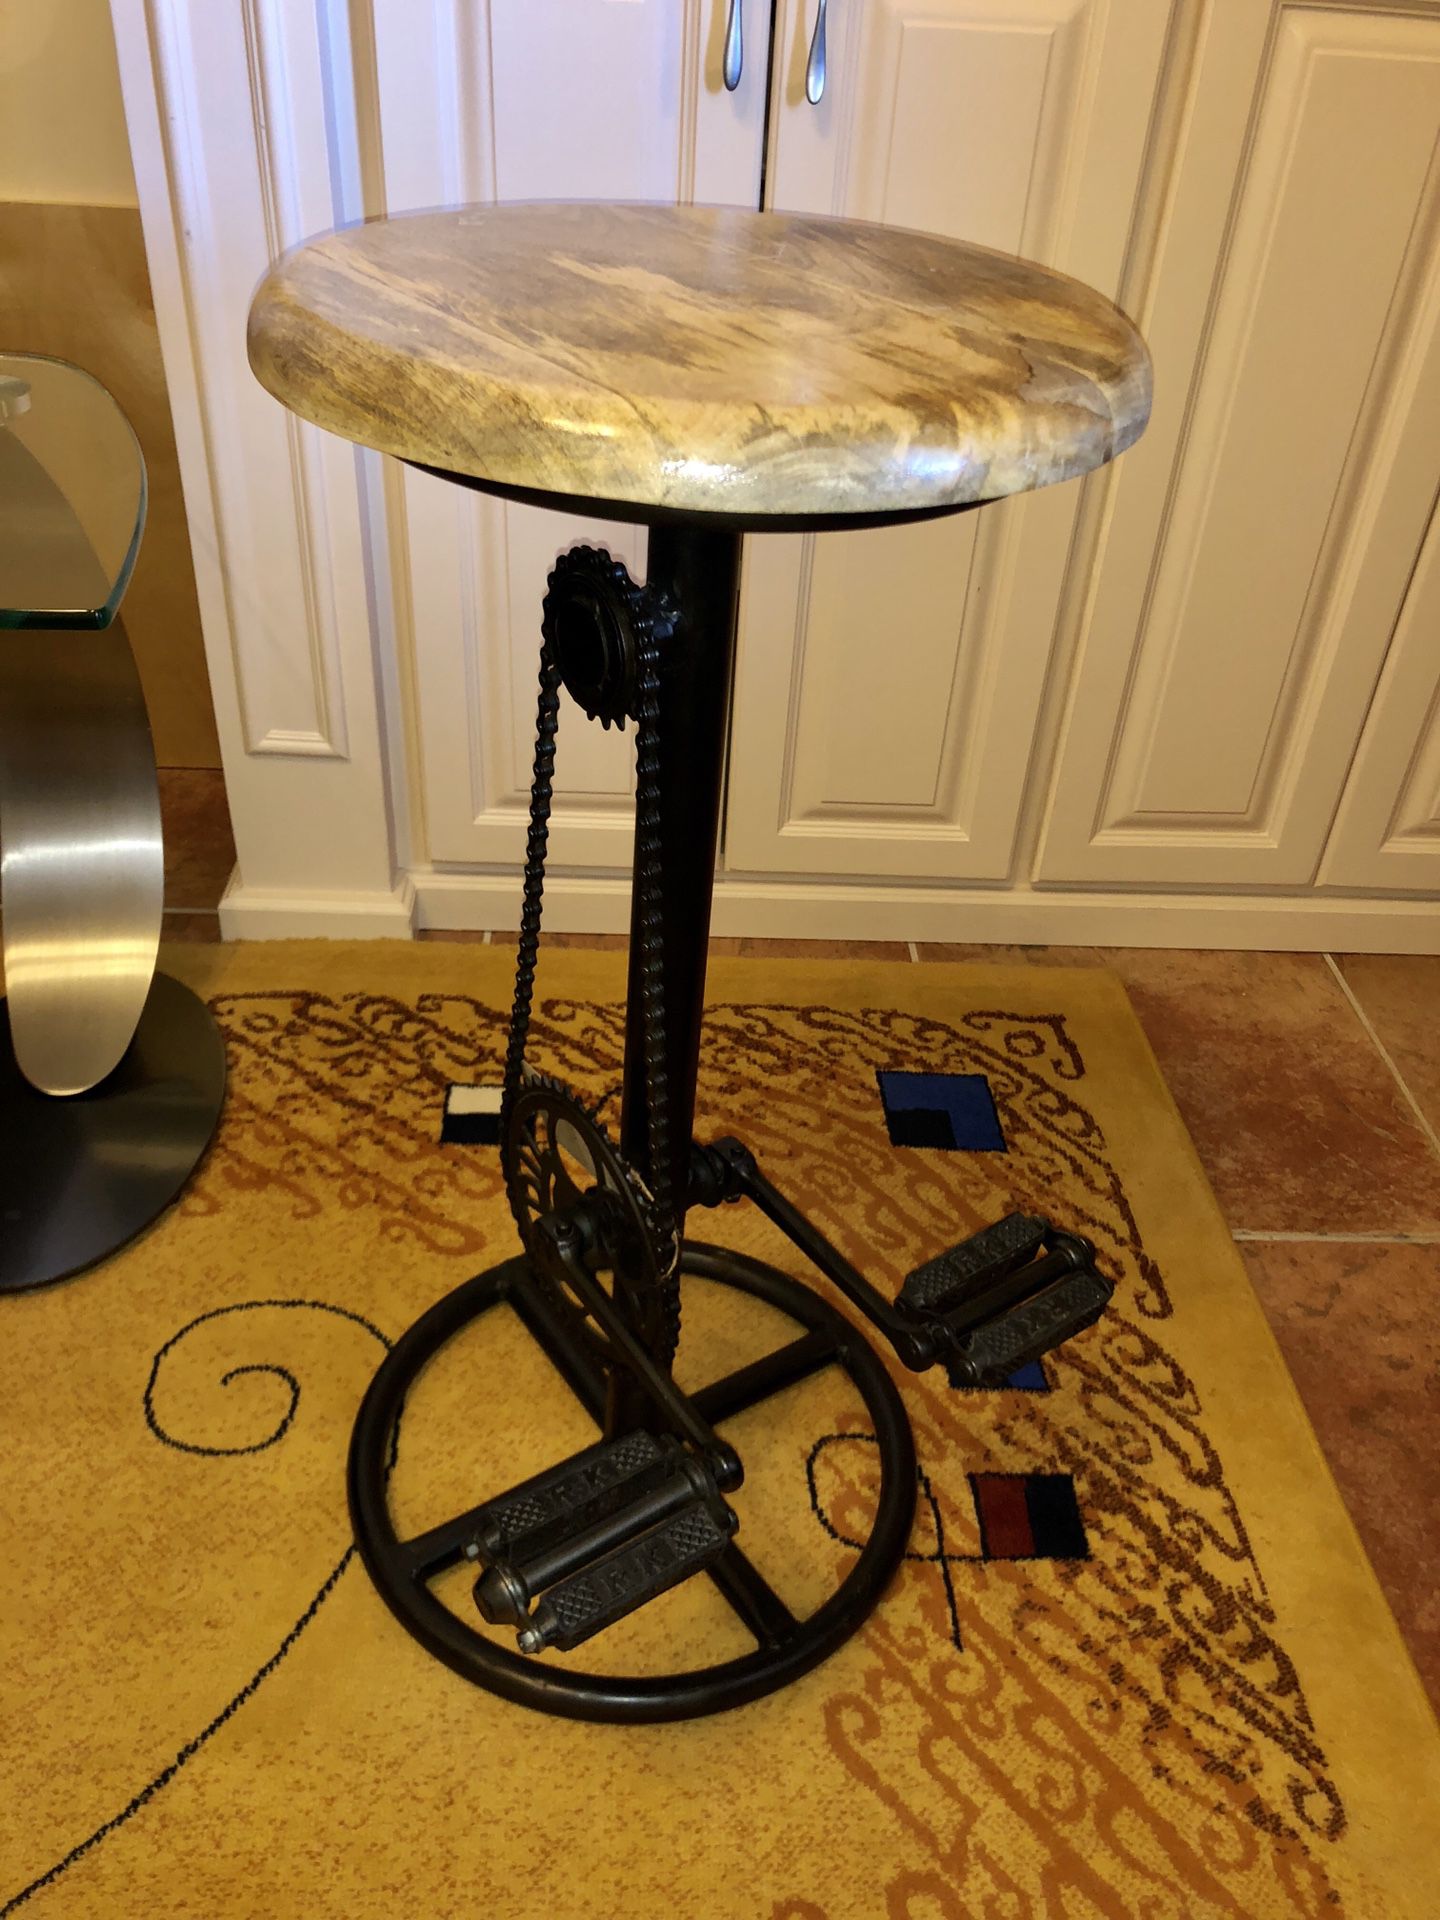 2 bicycle pedal bike stools available $169 each brand new!